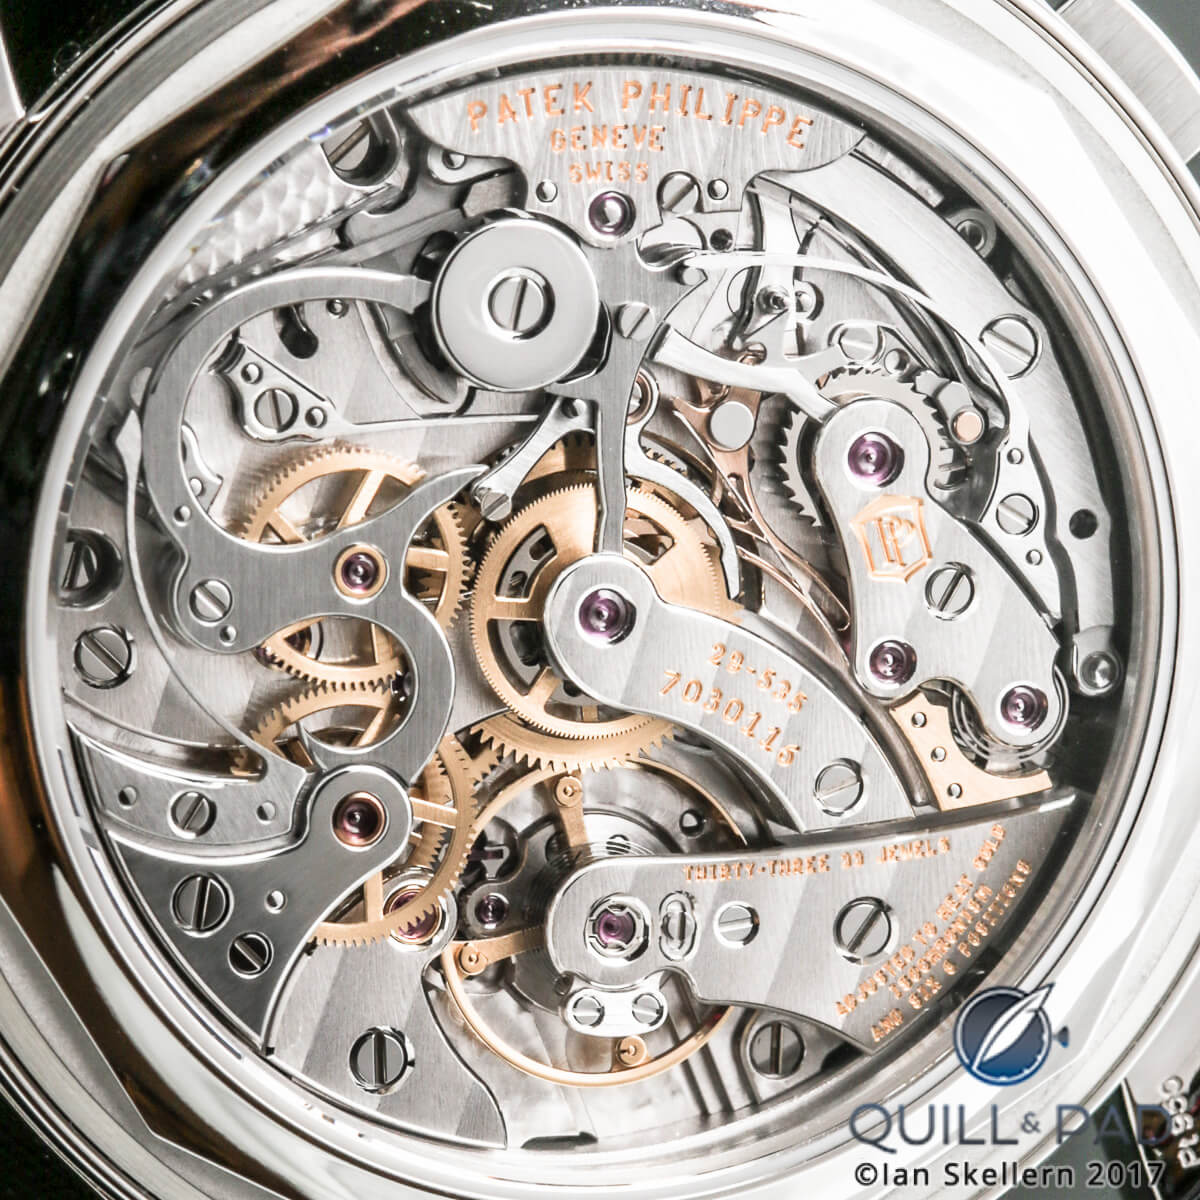 Beautifully finished movement of the Patek Philippe Reference 5170P